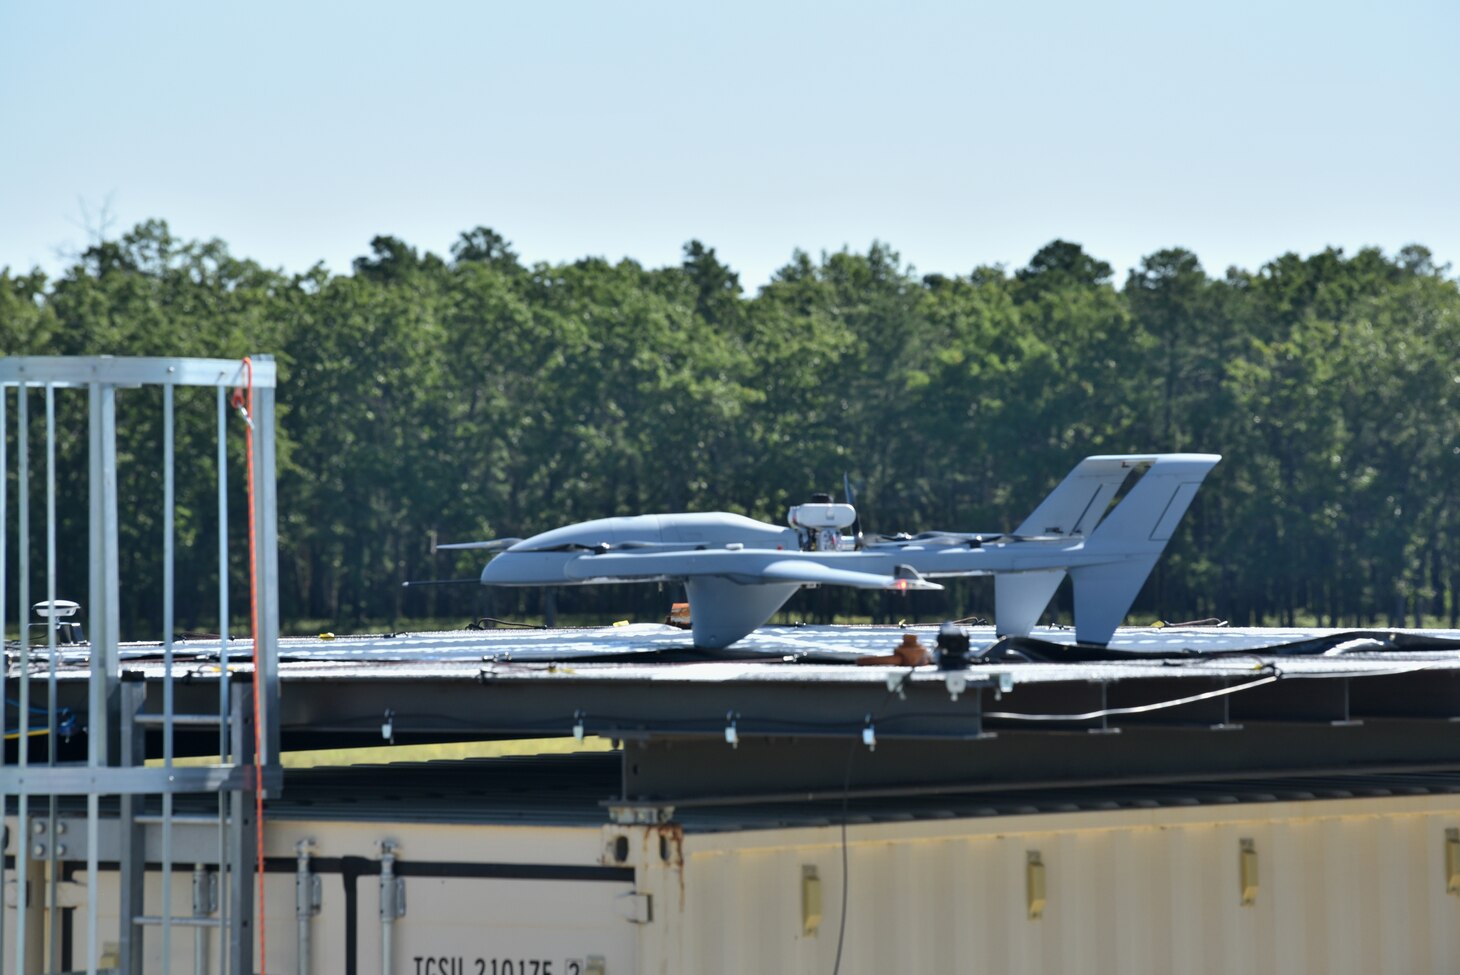 An unmanned aerial vehicle approaches and lands on the Ship Motion Platform at Naval Air Warfare Center Aircraft Division Lakehurst, New Jersey.